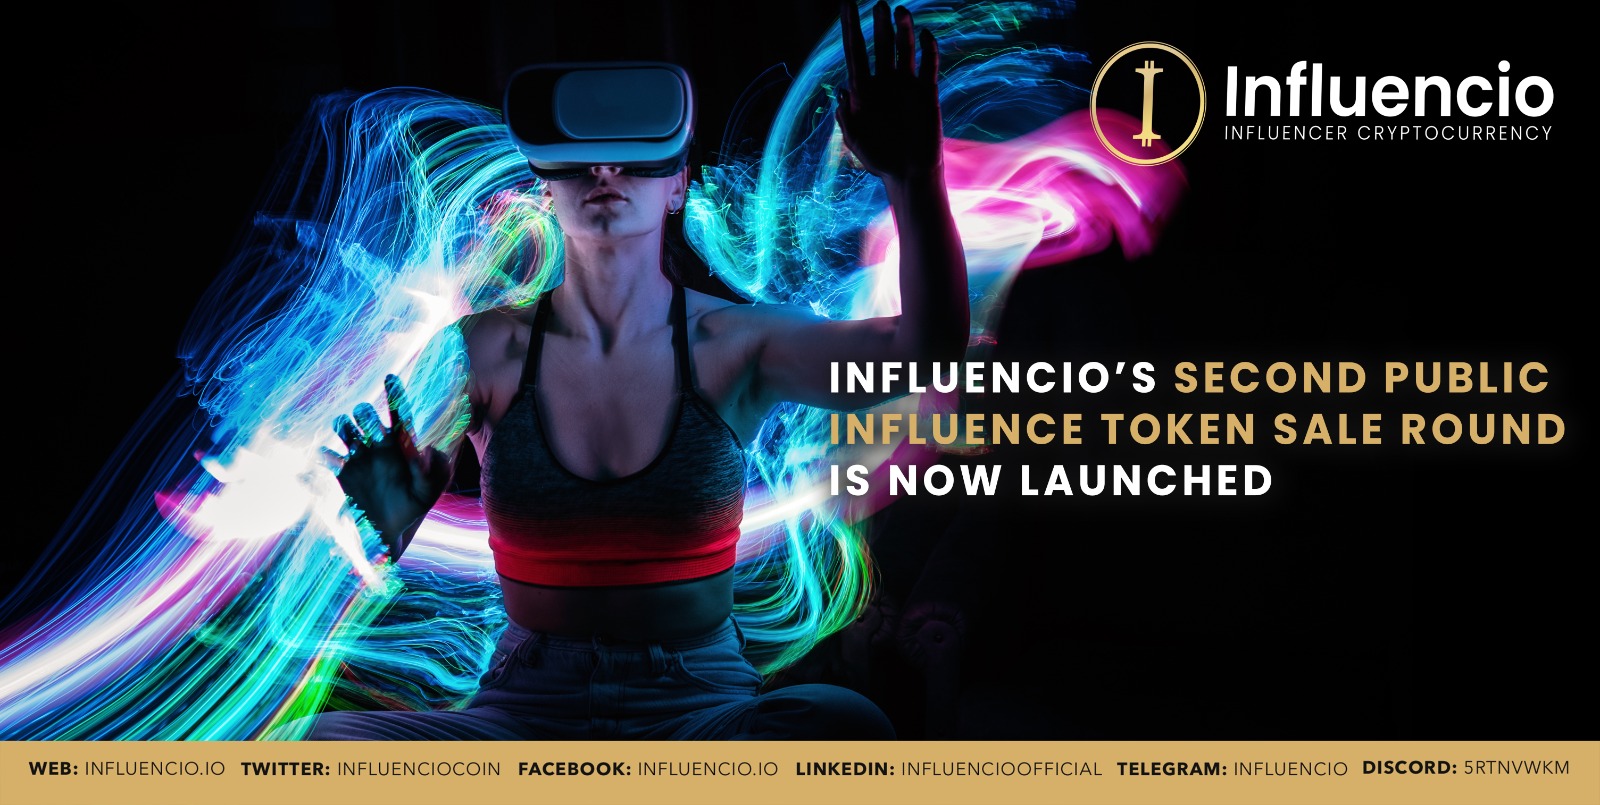 Influencio’s Second Public INFLUENCE Token Sale Round is Now Launched